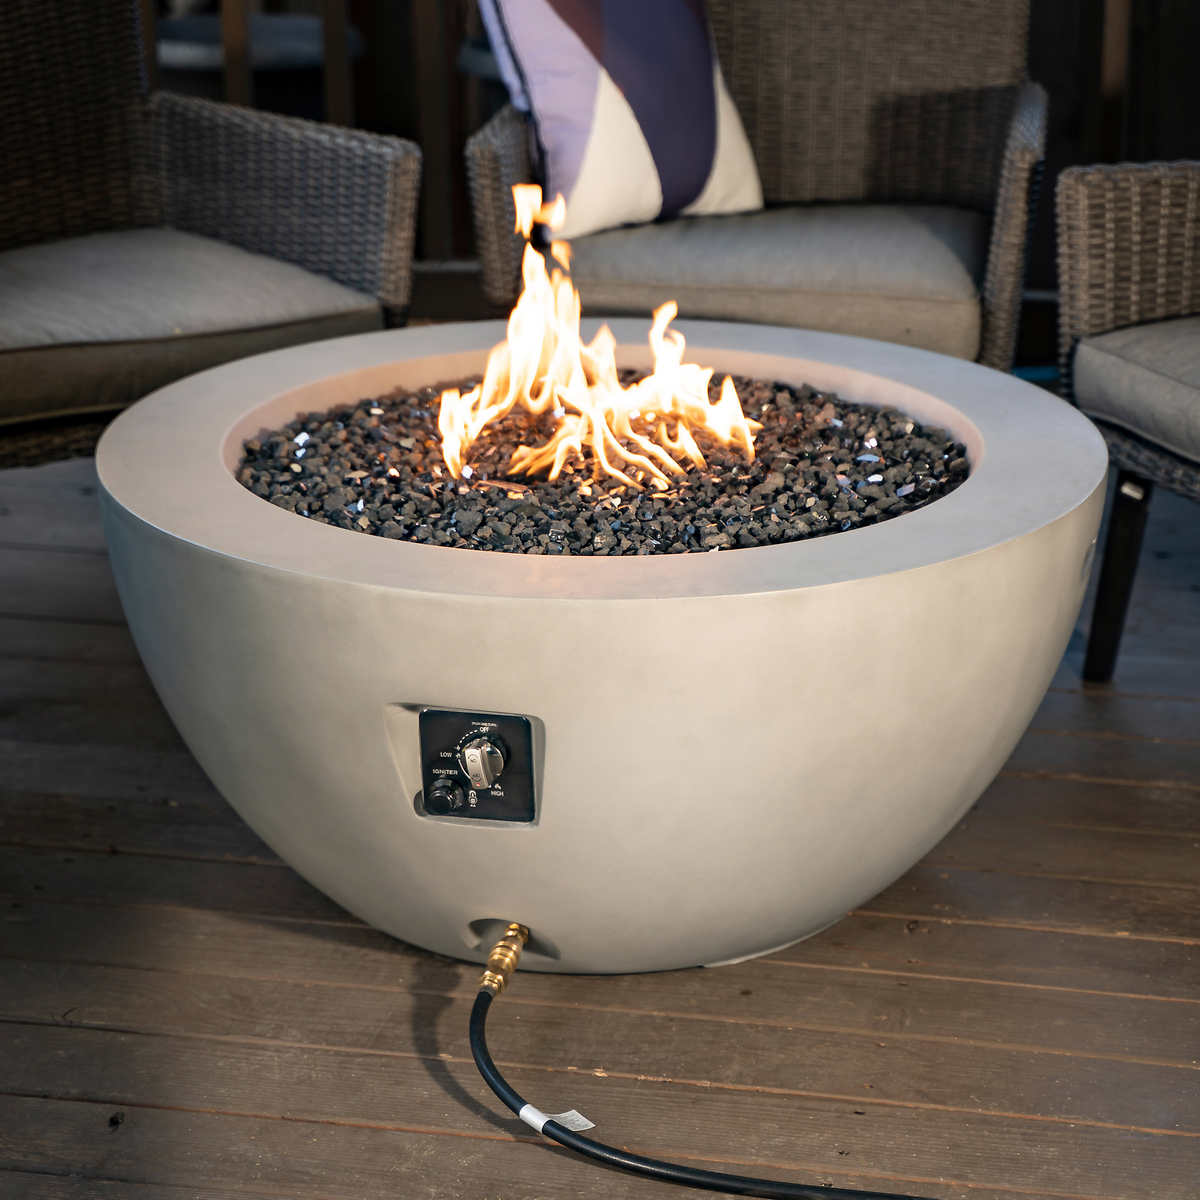 Faux Concrete Gas Fire Pit Costco, How To Convert My Propane Fire Pit To Natural Gas